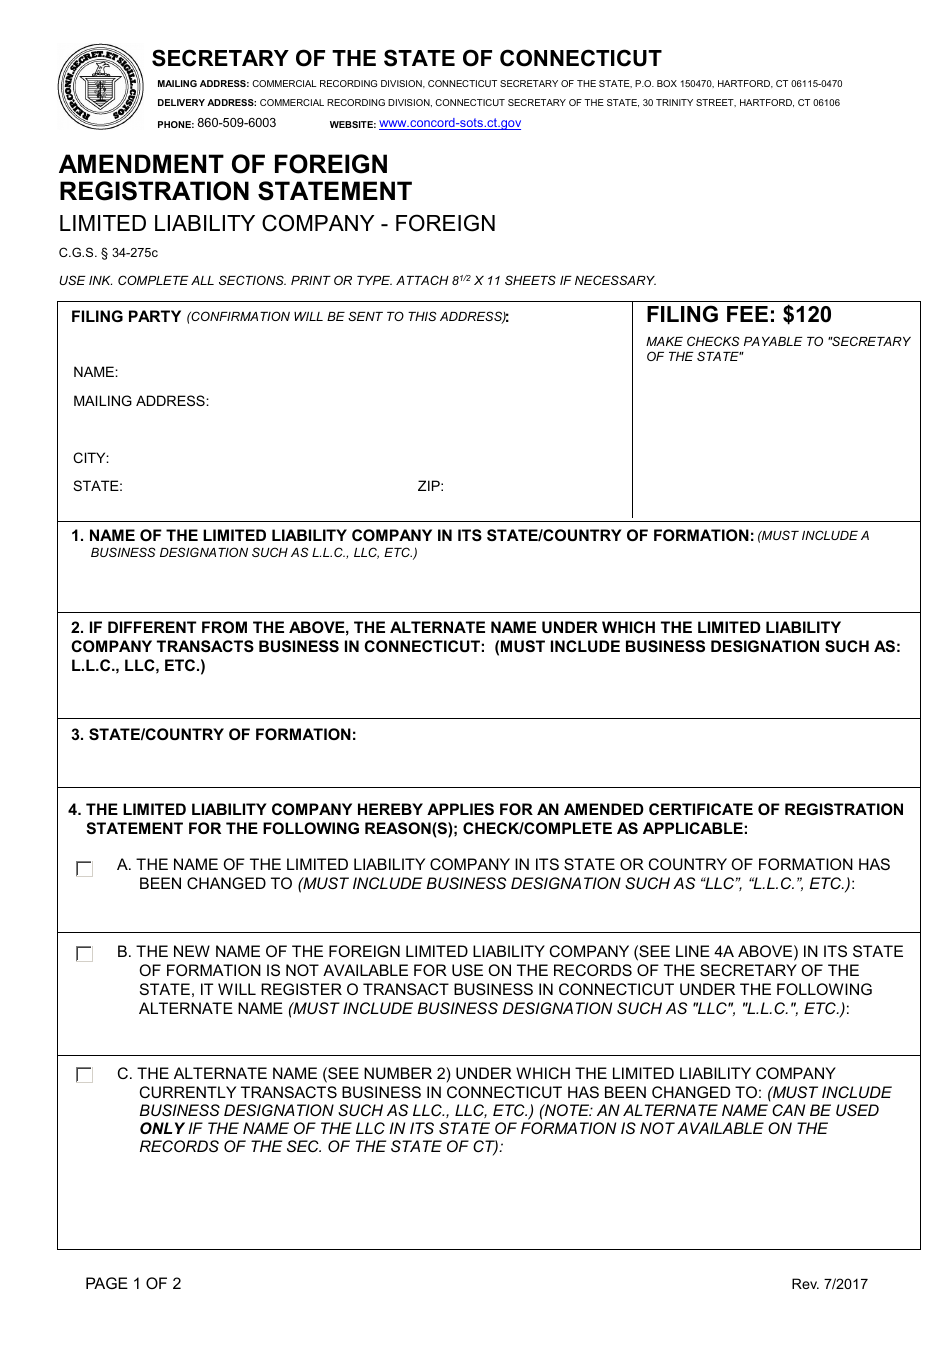 Amendment of Foreign Registration Statement - Limited Liability Company - Foreign - Connecticut, Page 1